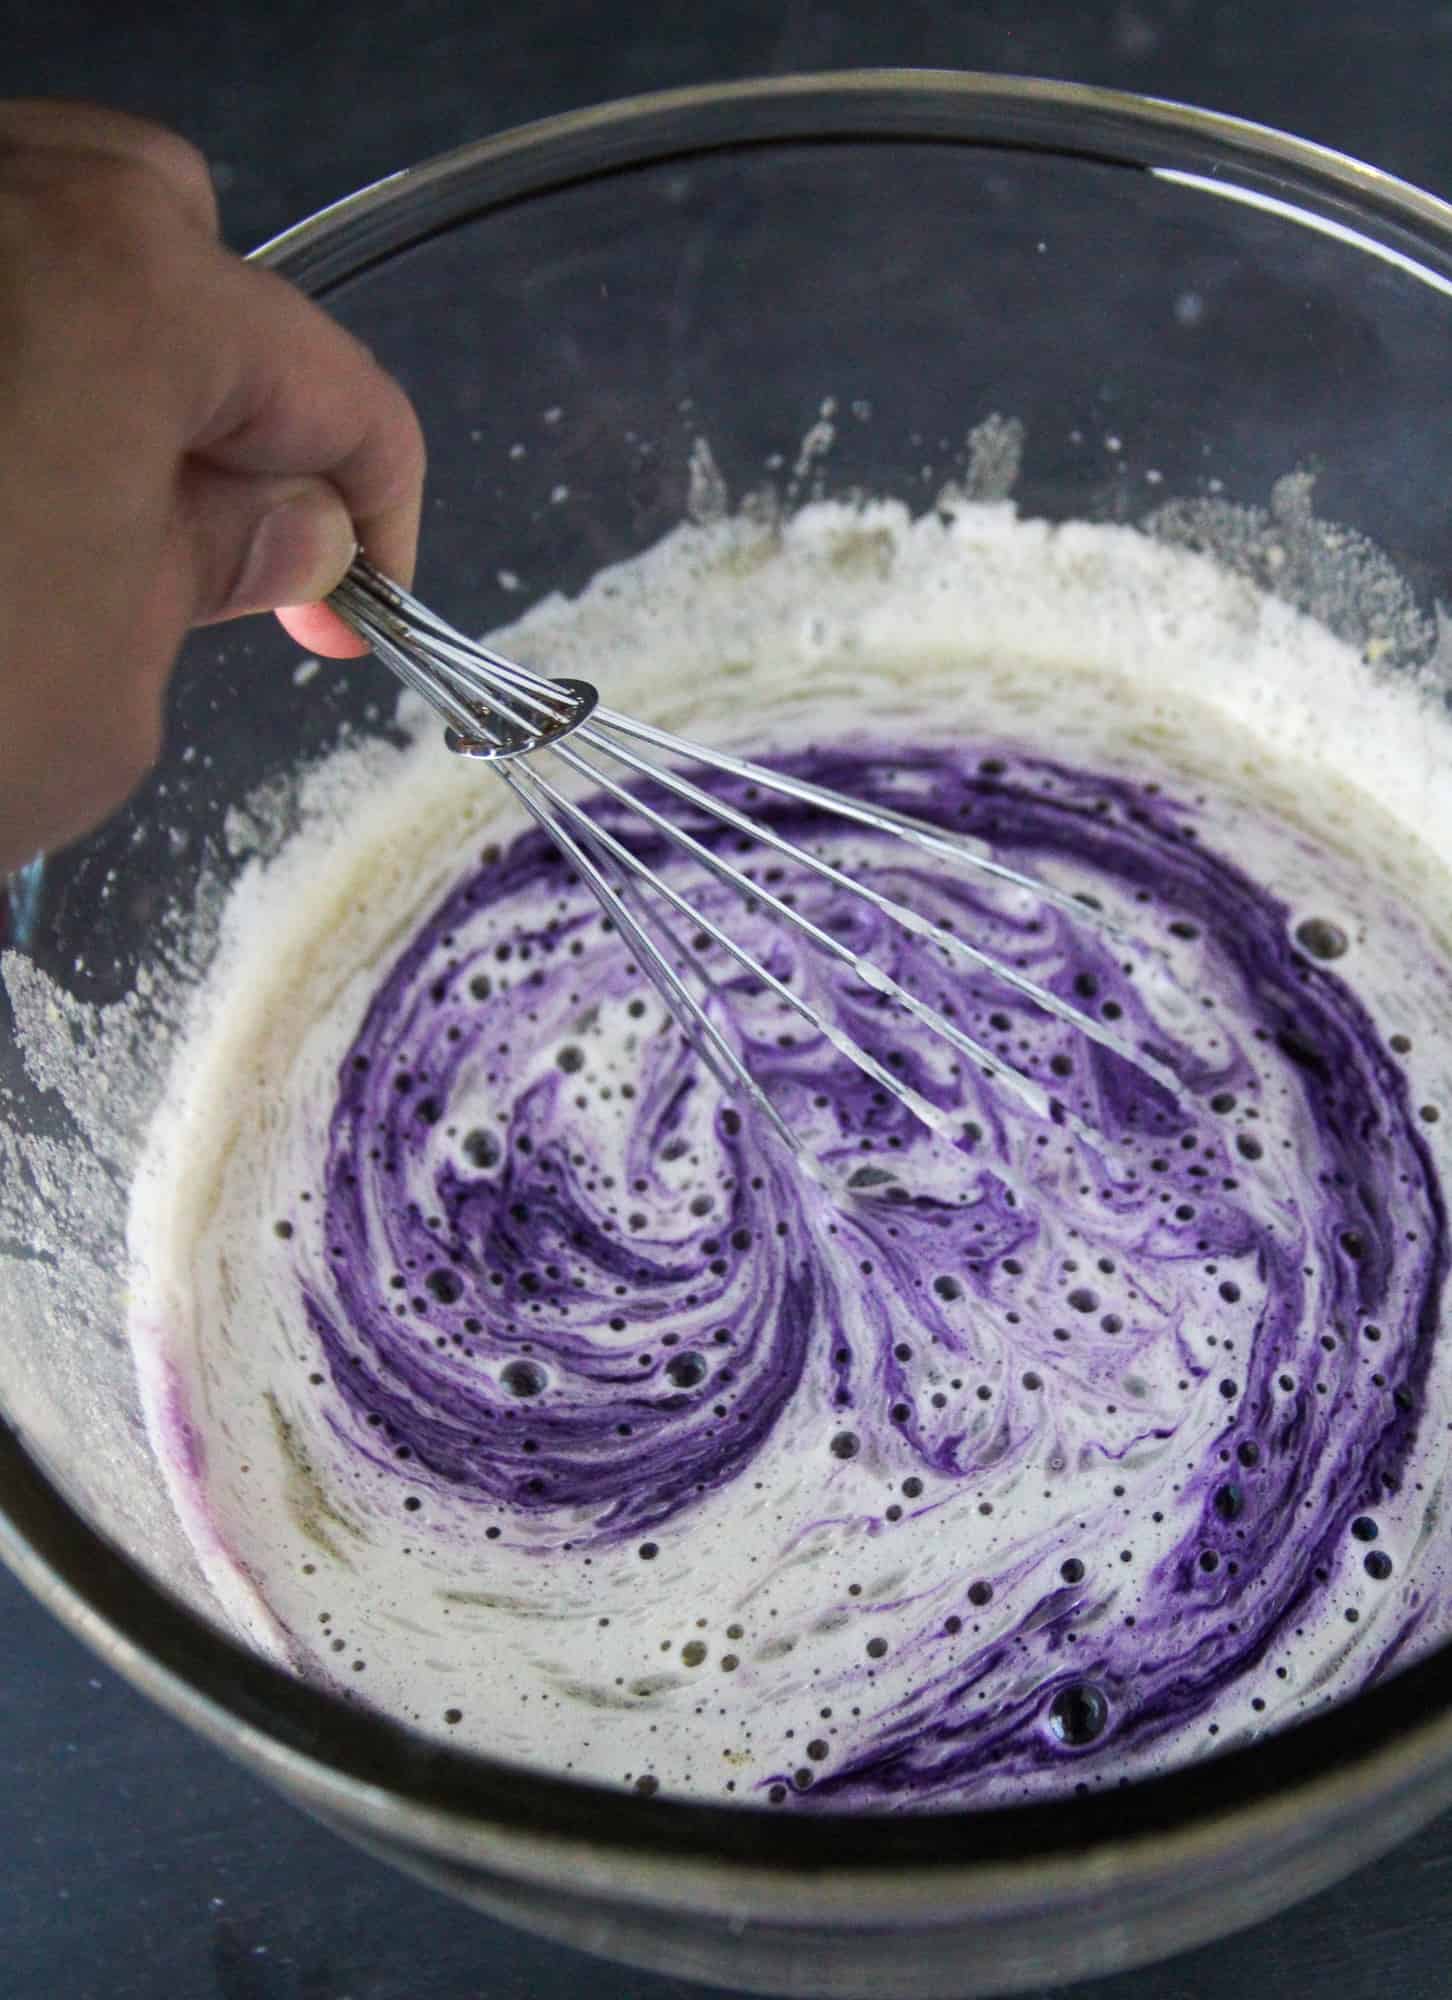 Mixing in the ube flavoring onto the yolk mixture.